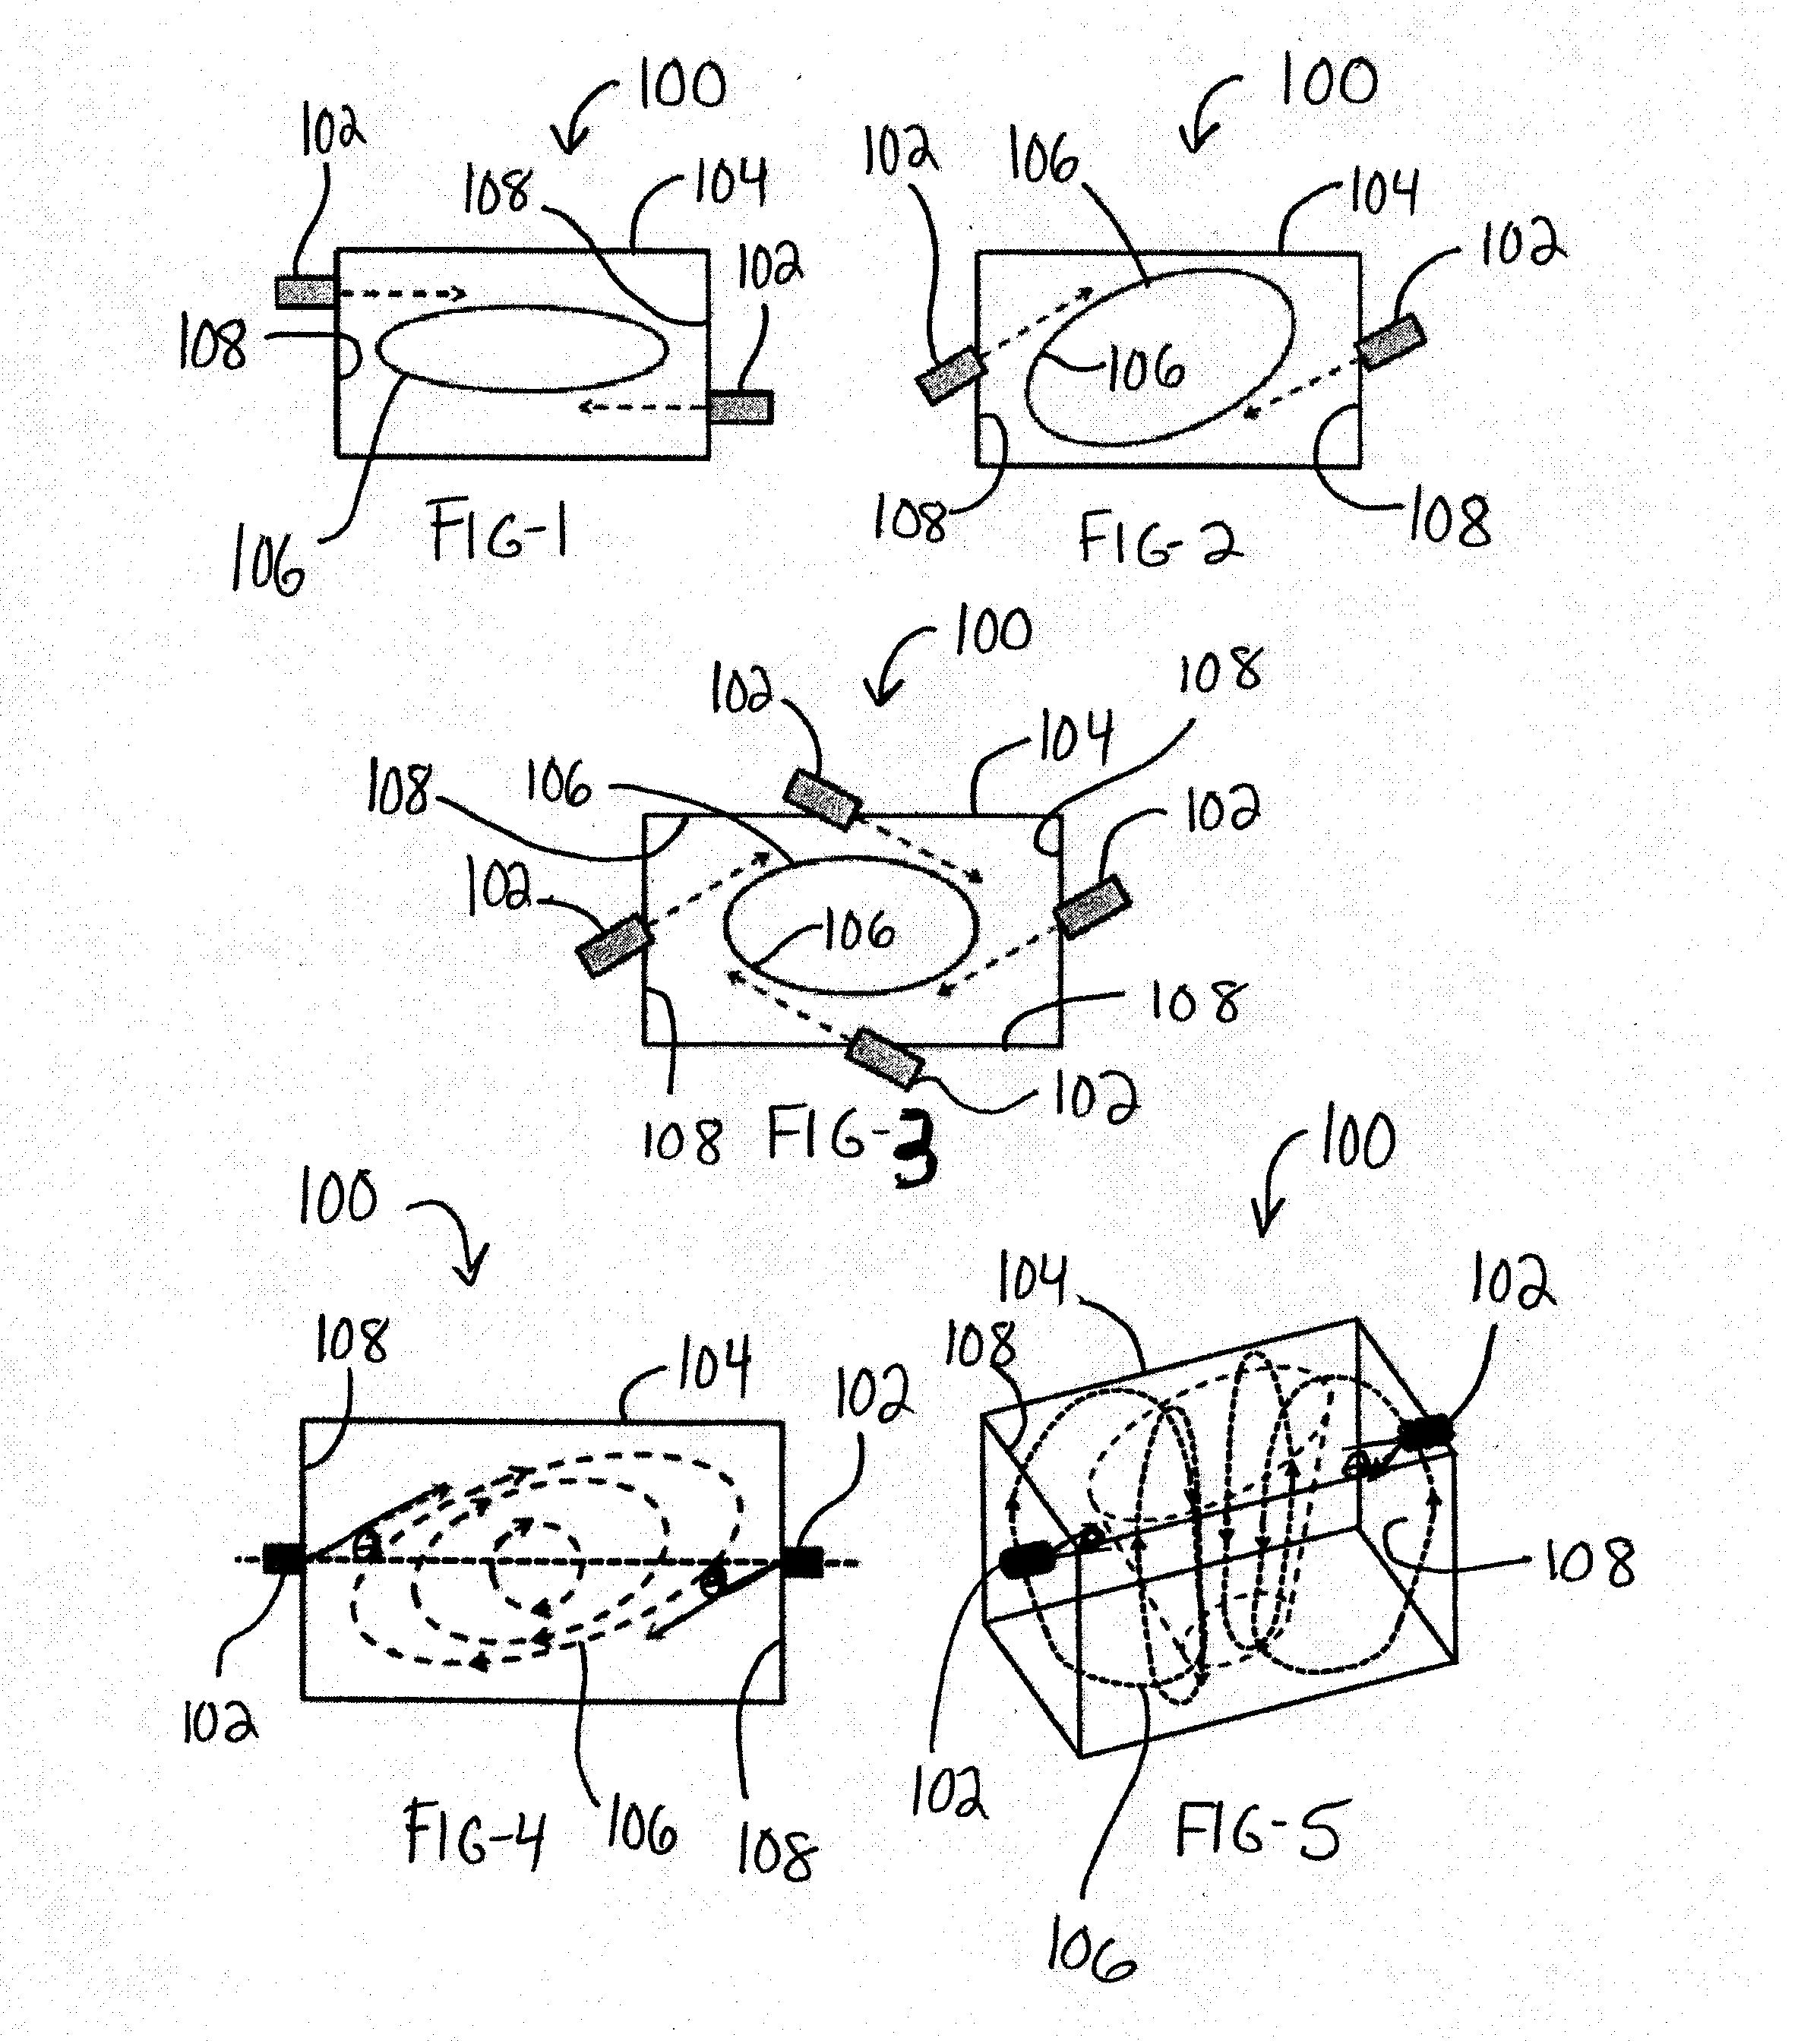 Oxy-Fuel Furnace and Method of Heating Material in an Oxy-Fuel Furnace